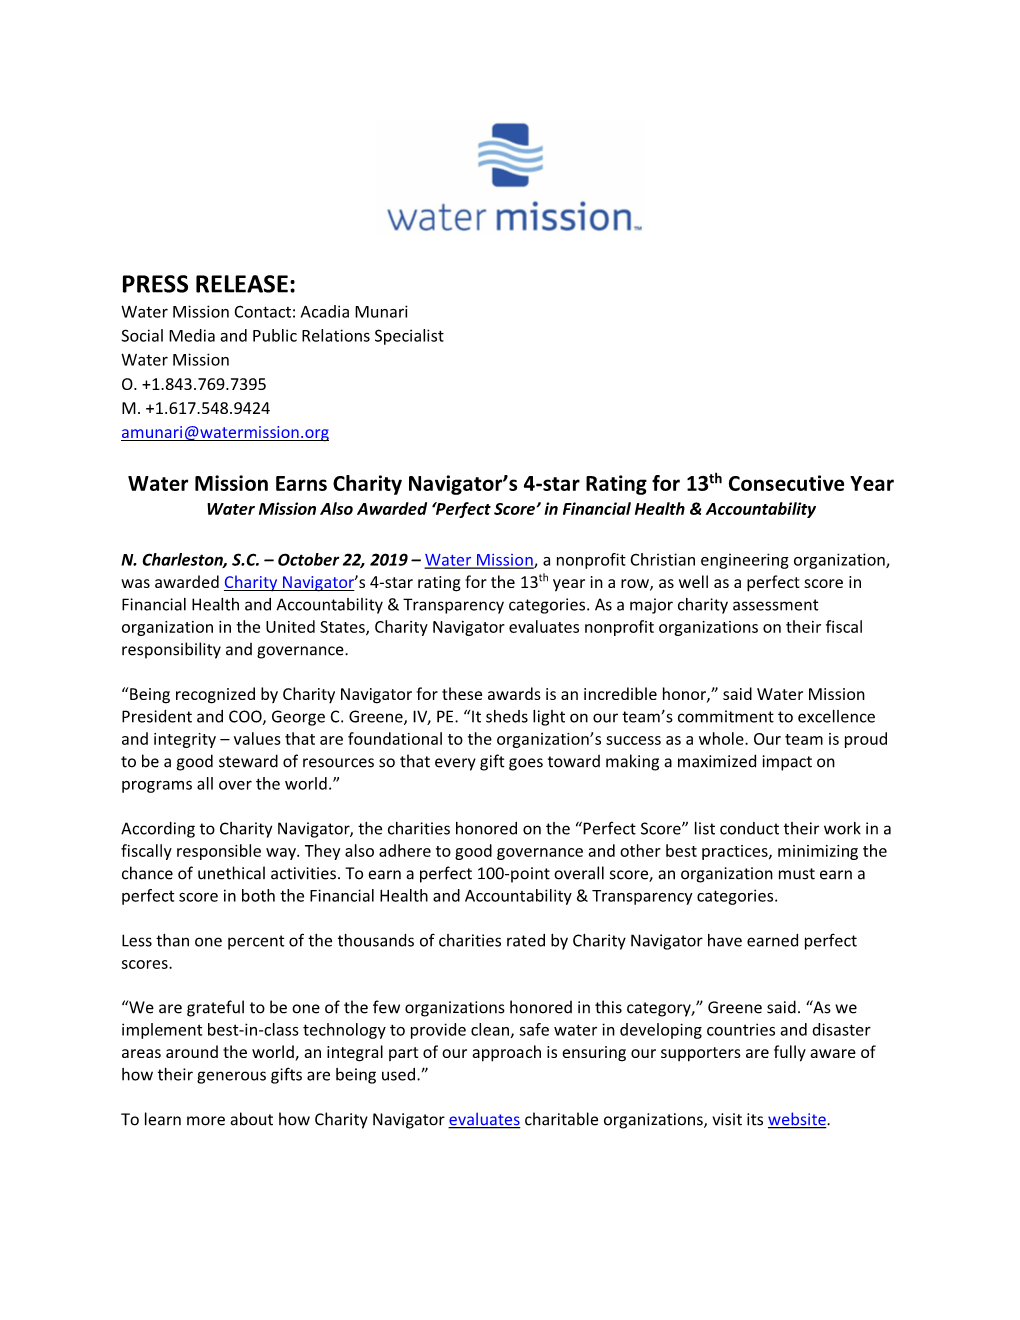 PRESS RELEASE: Water Mission Contact: Acadia Munari Social Media and Public Relations Specialist Water Mission O